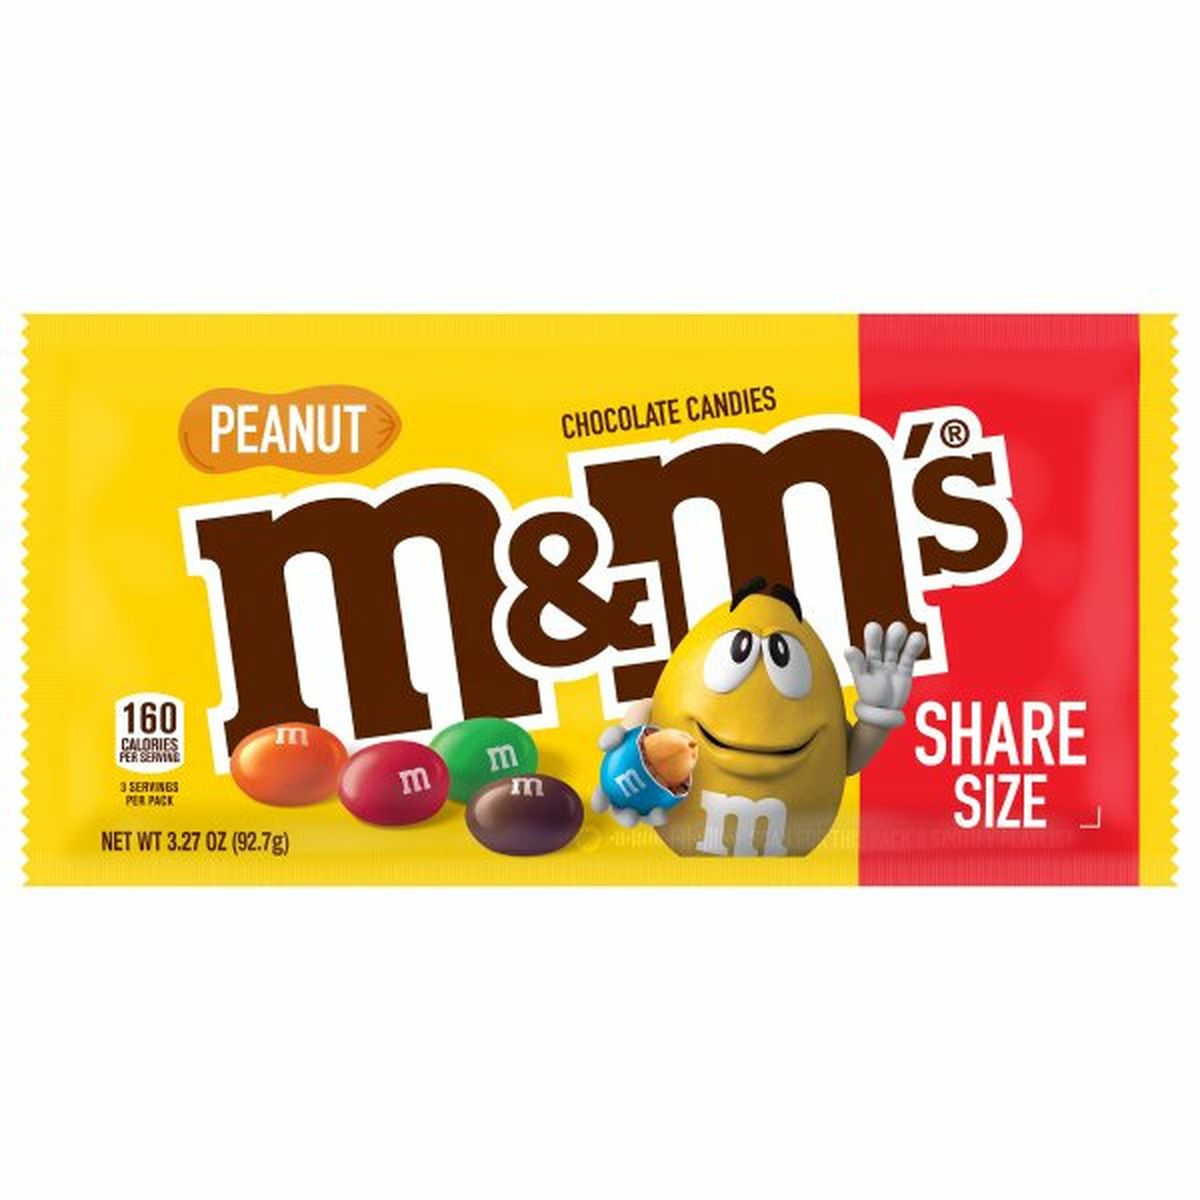 Calories in M&M's Chocolate Candies, Peanut, Share Size